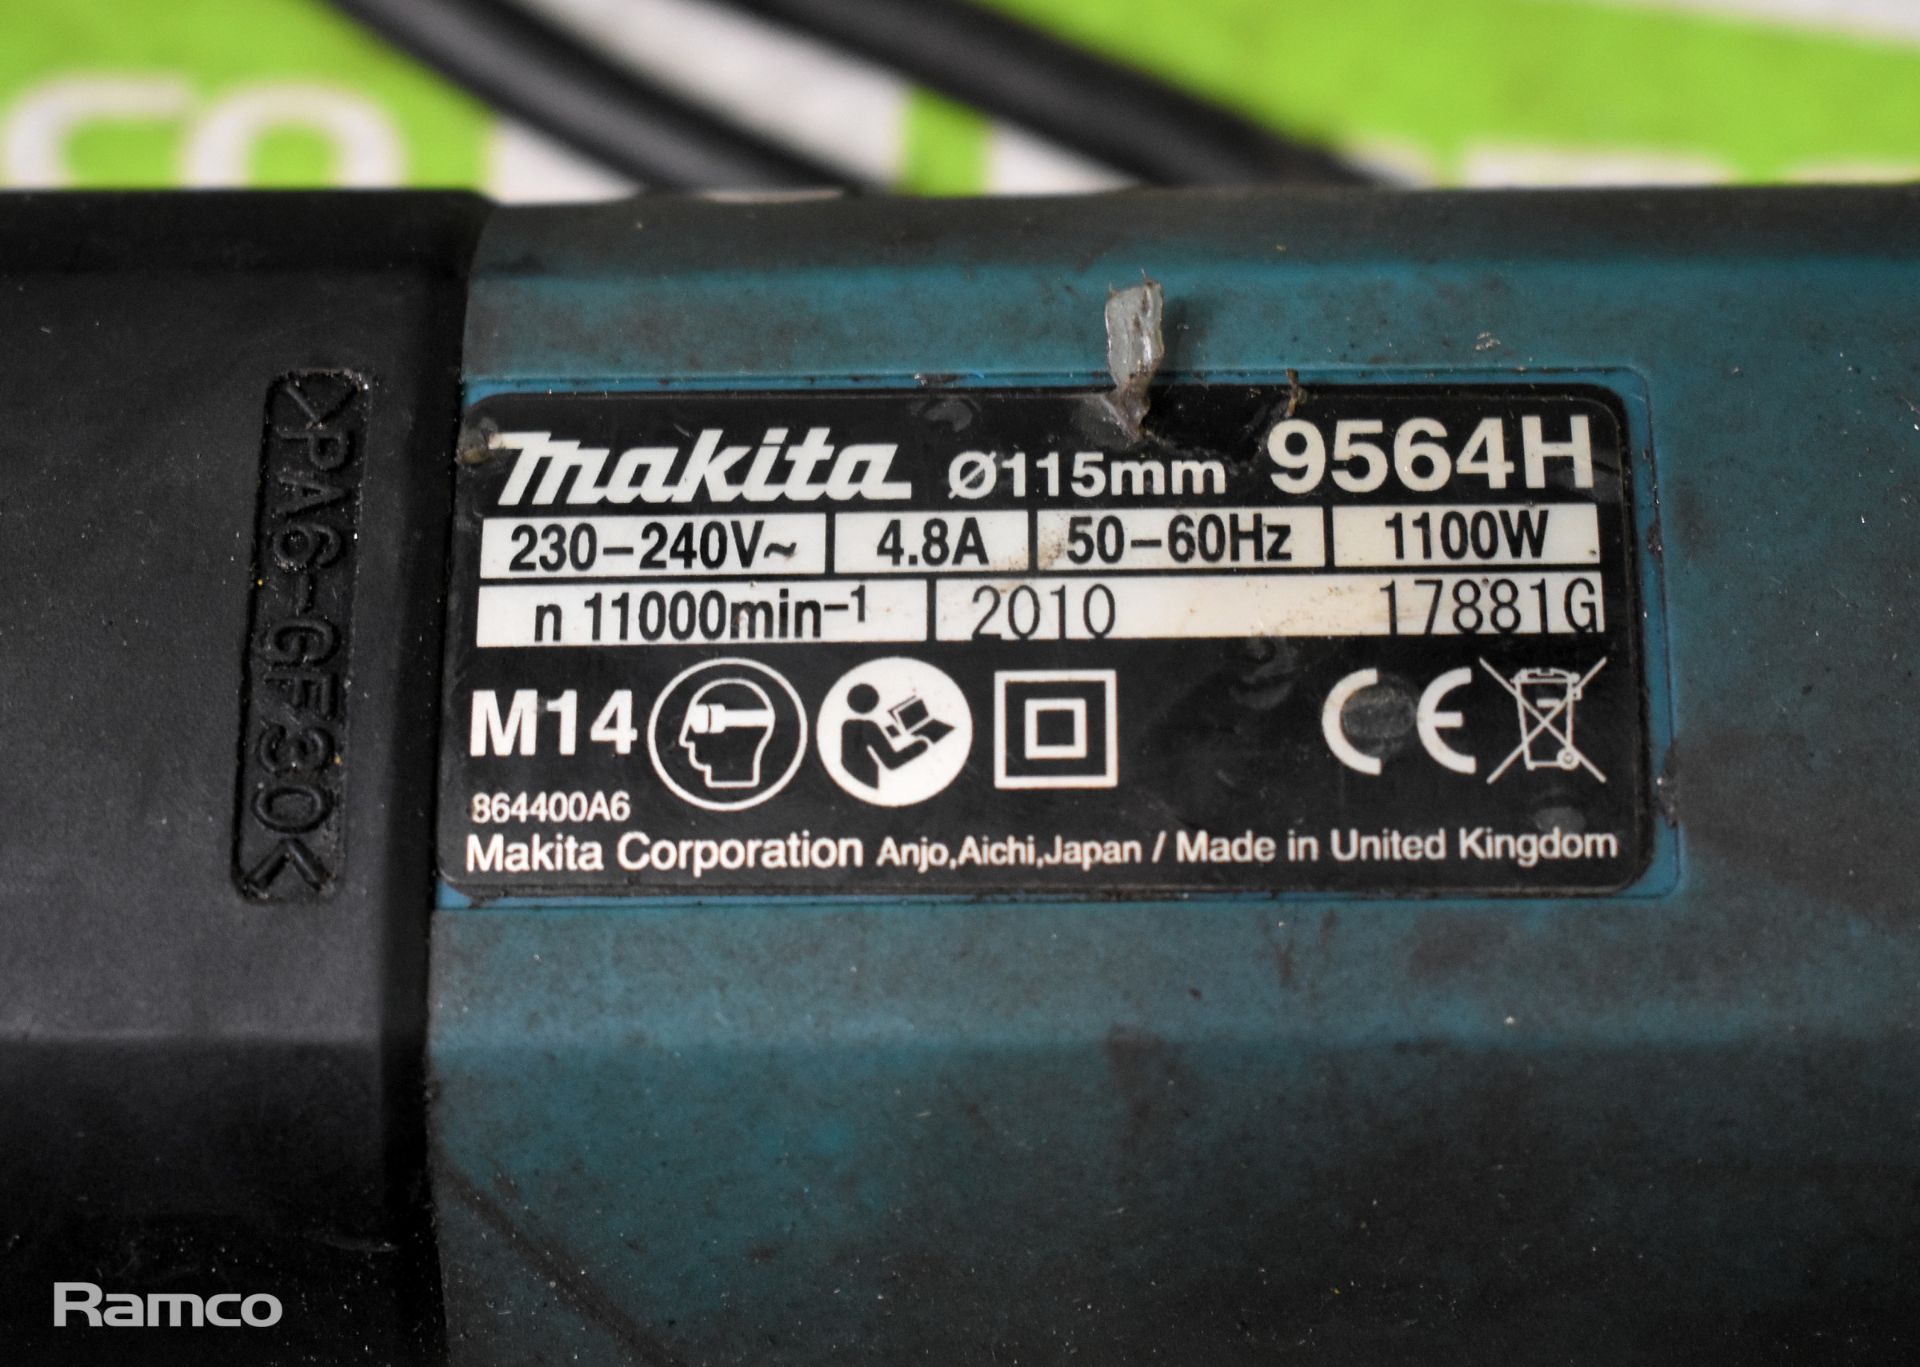 Makita 9564 portable electric grinder - in metal case - Image 4 of 6